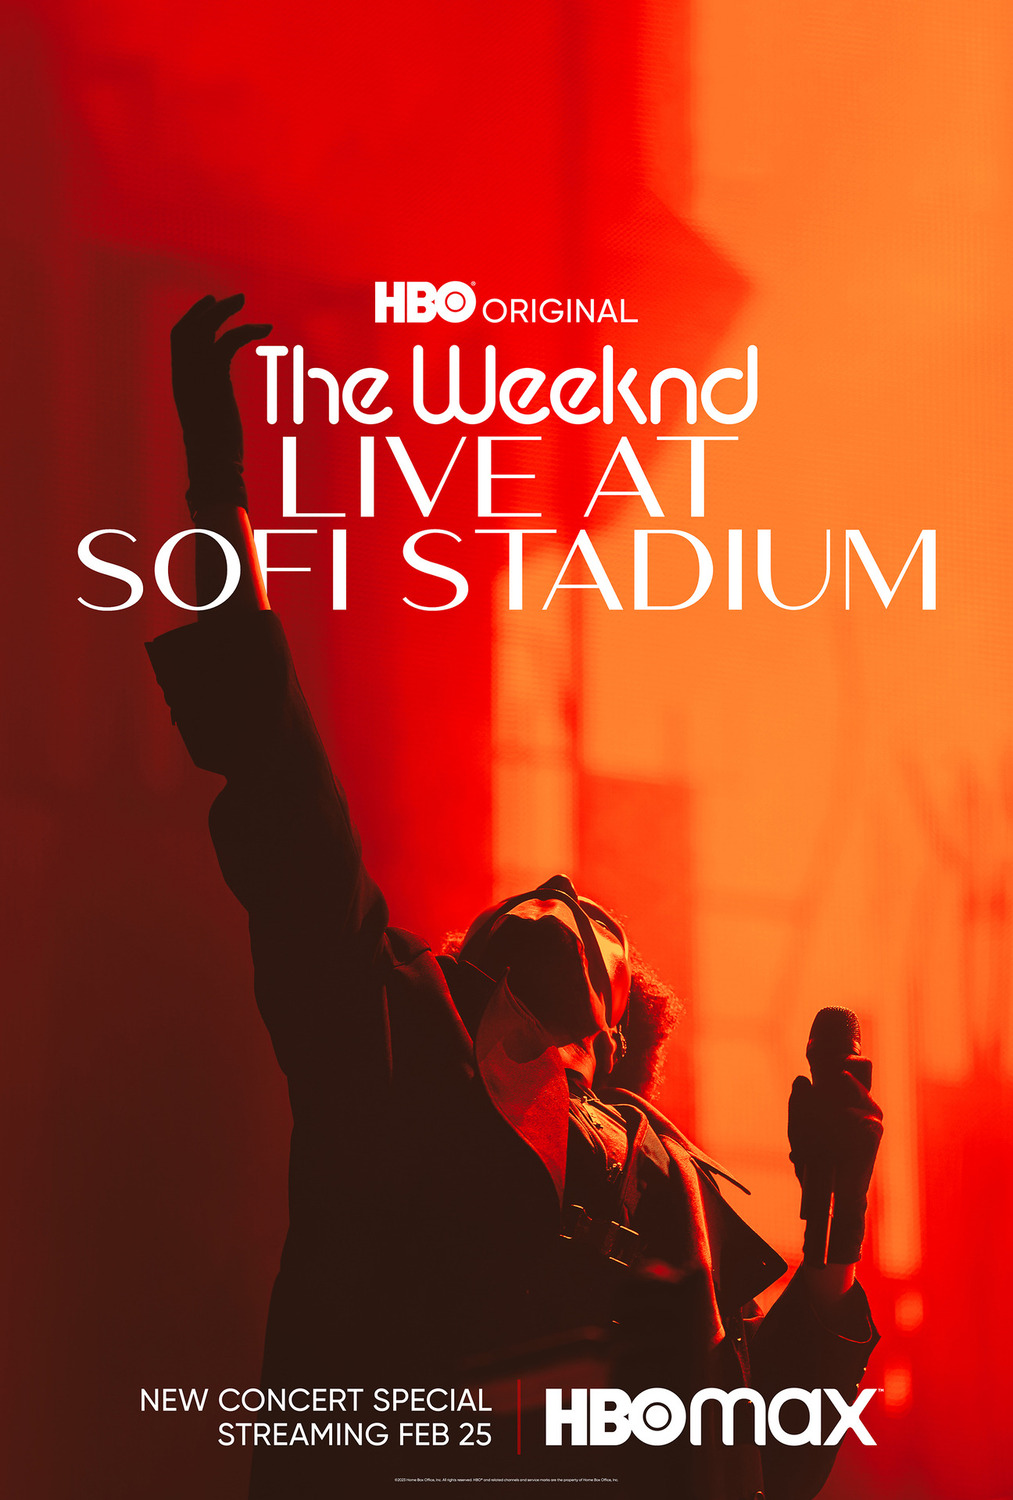 Extra Large TV Poster Image for The Weeknd: Live At SoFi Stadium 